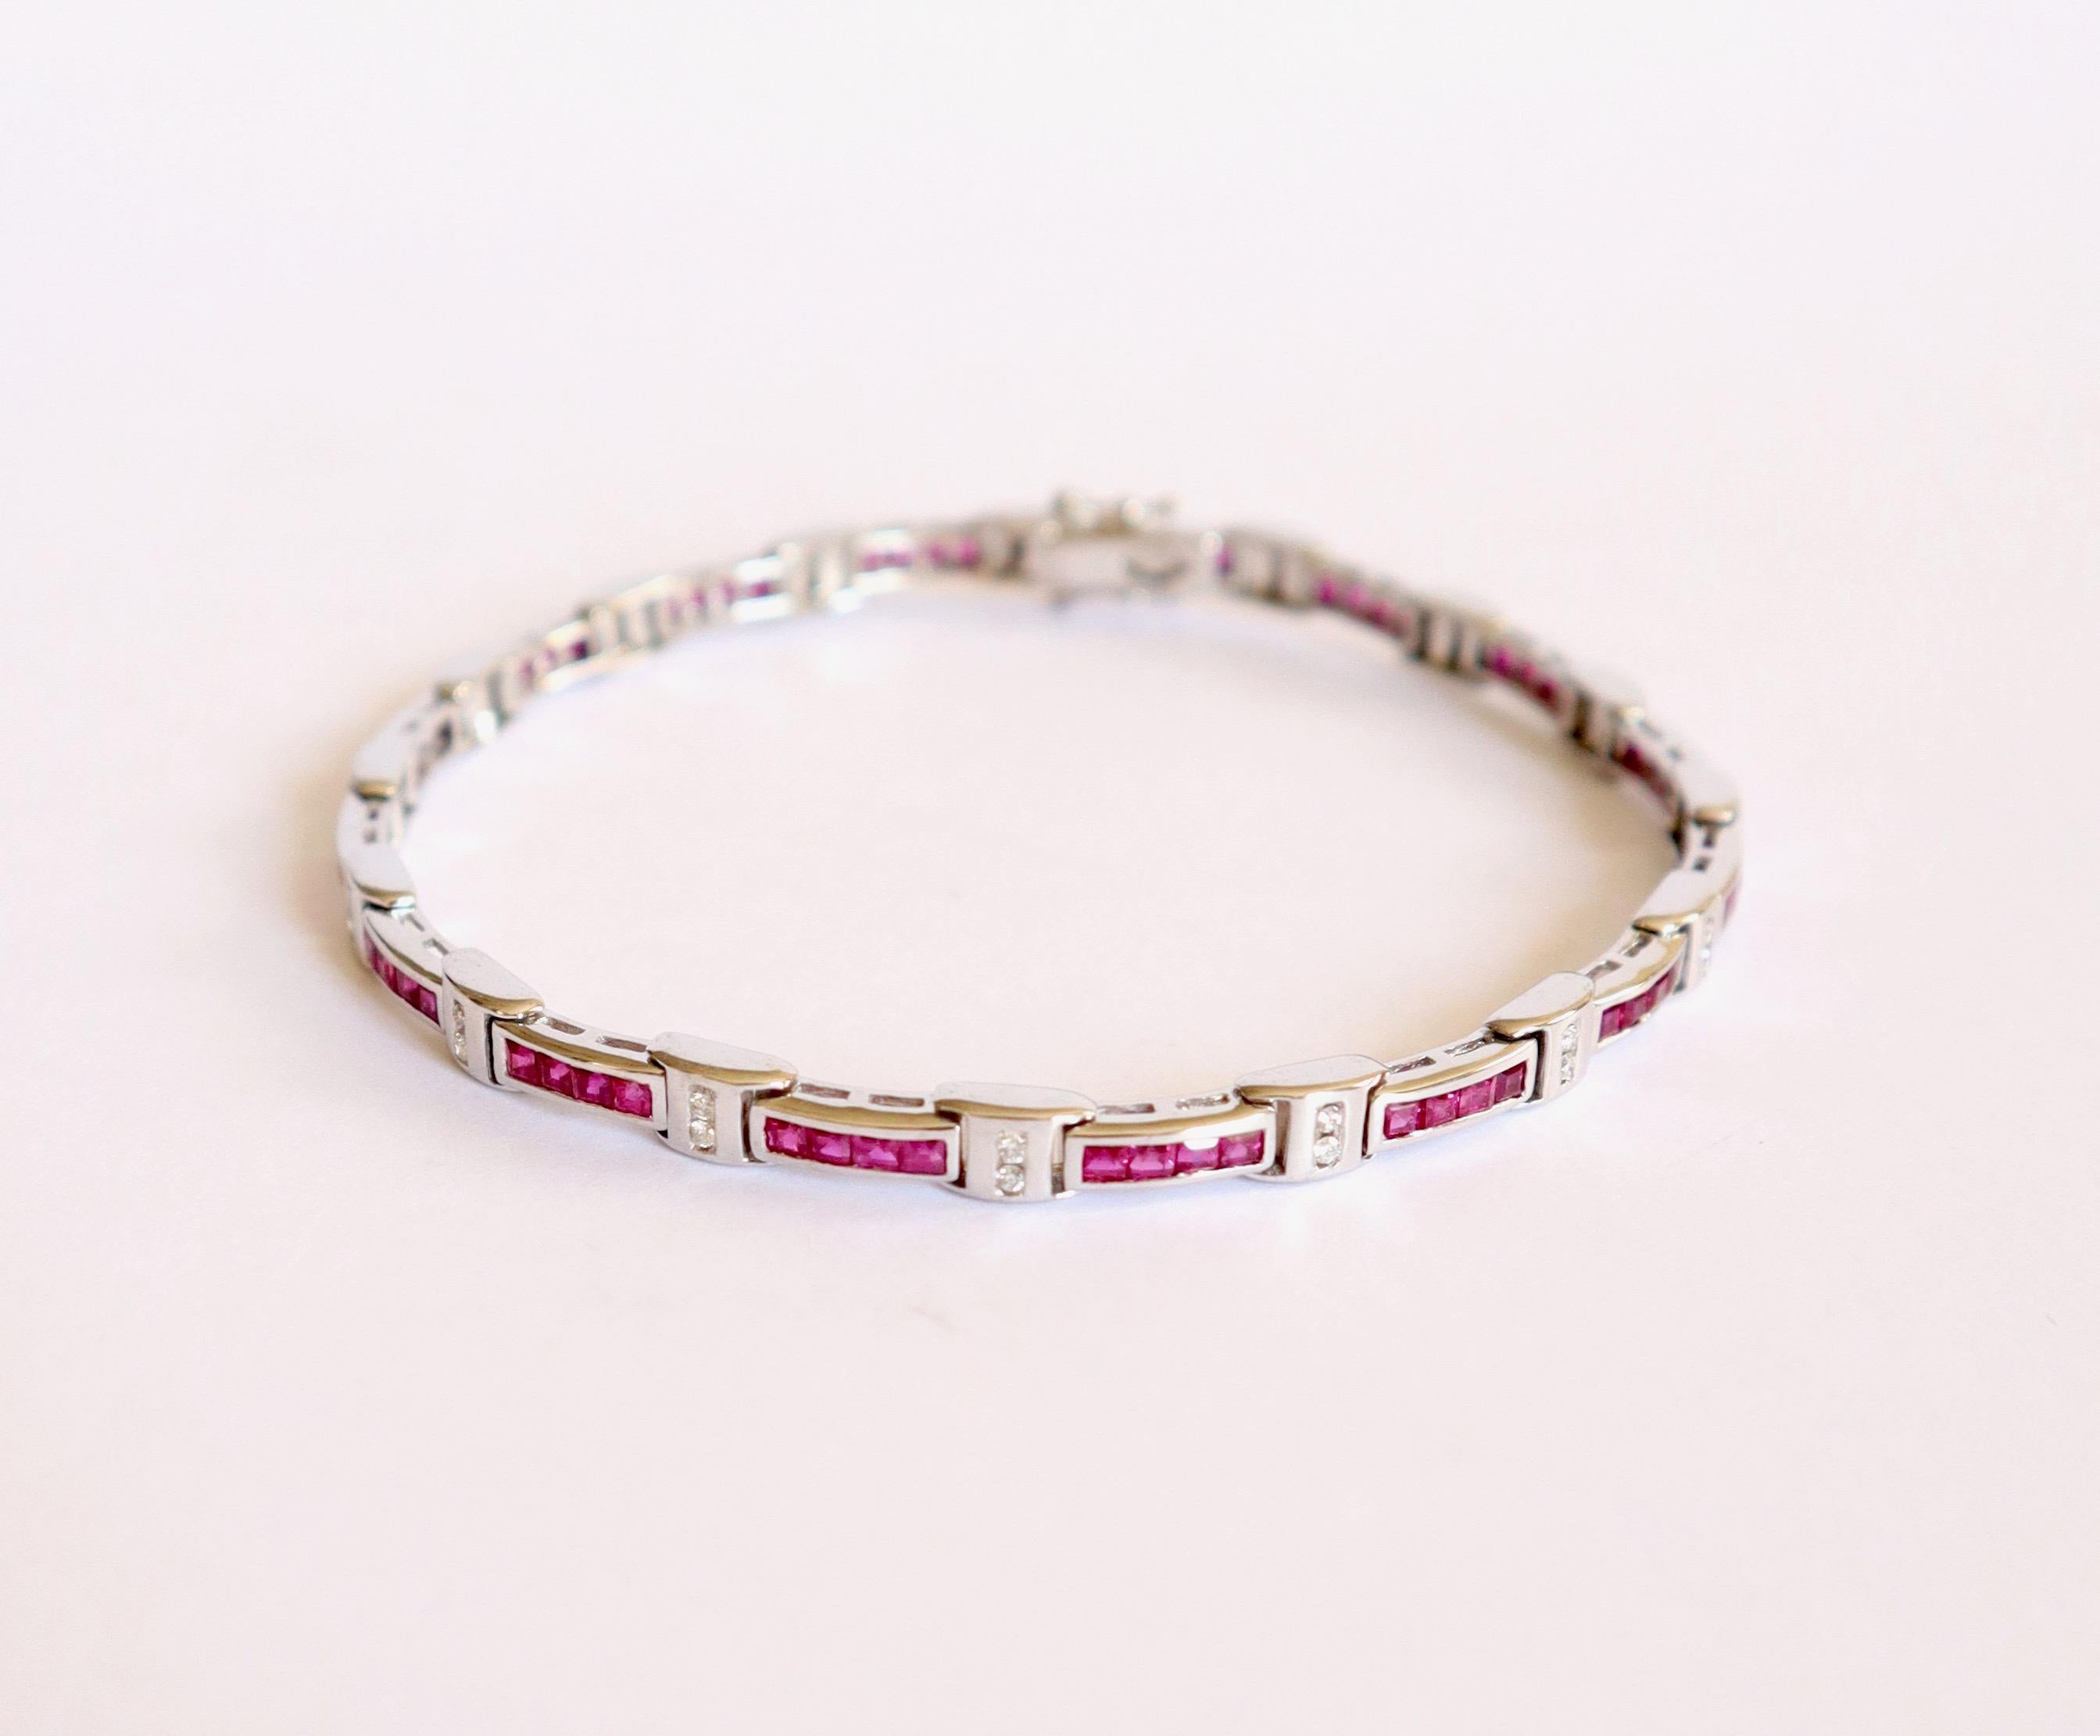 Set of 3 Bracelets in 18 Kt White Gold, Rubies, Emeralds, Sapphires and Diamonds For Sale 3